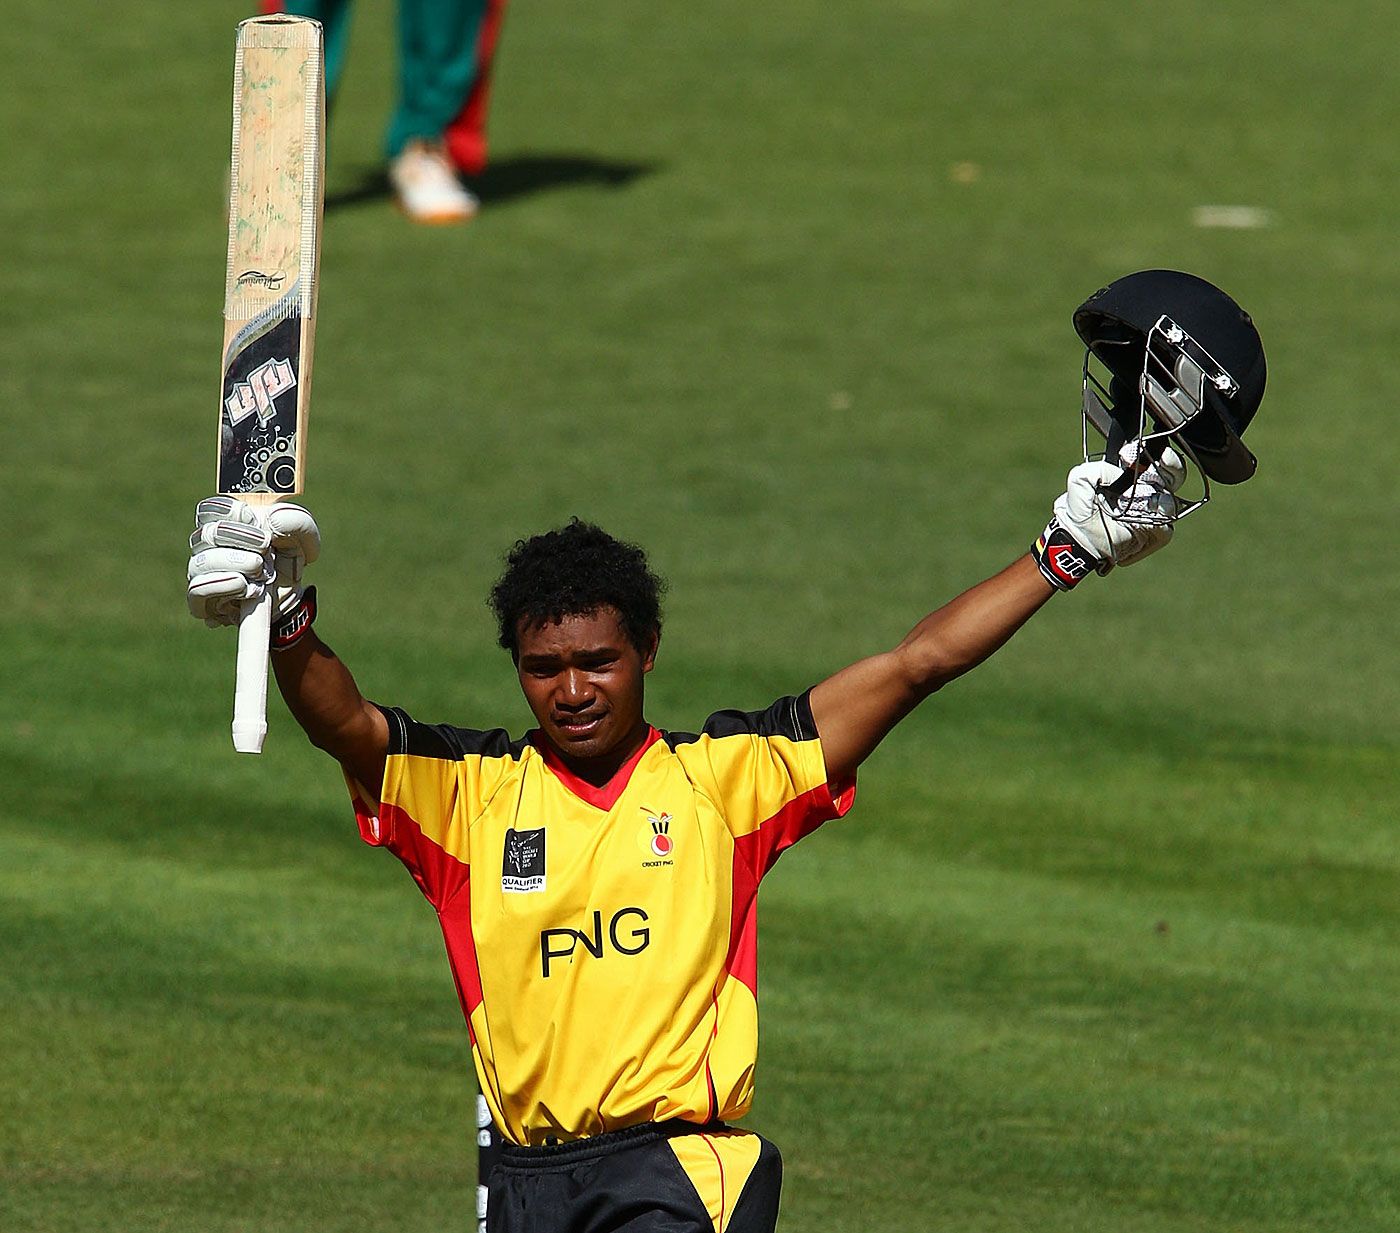 Papua New Guinea Under-19s Cricket Team | PNG19 | Papua New Guinea  Under-19s Team News and Matches